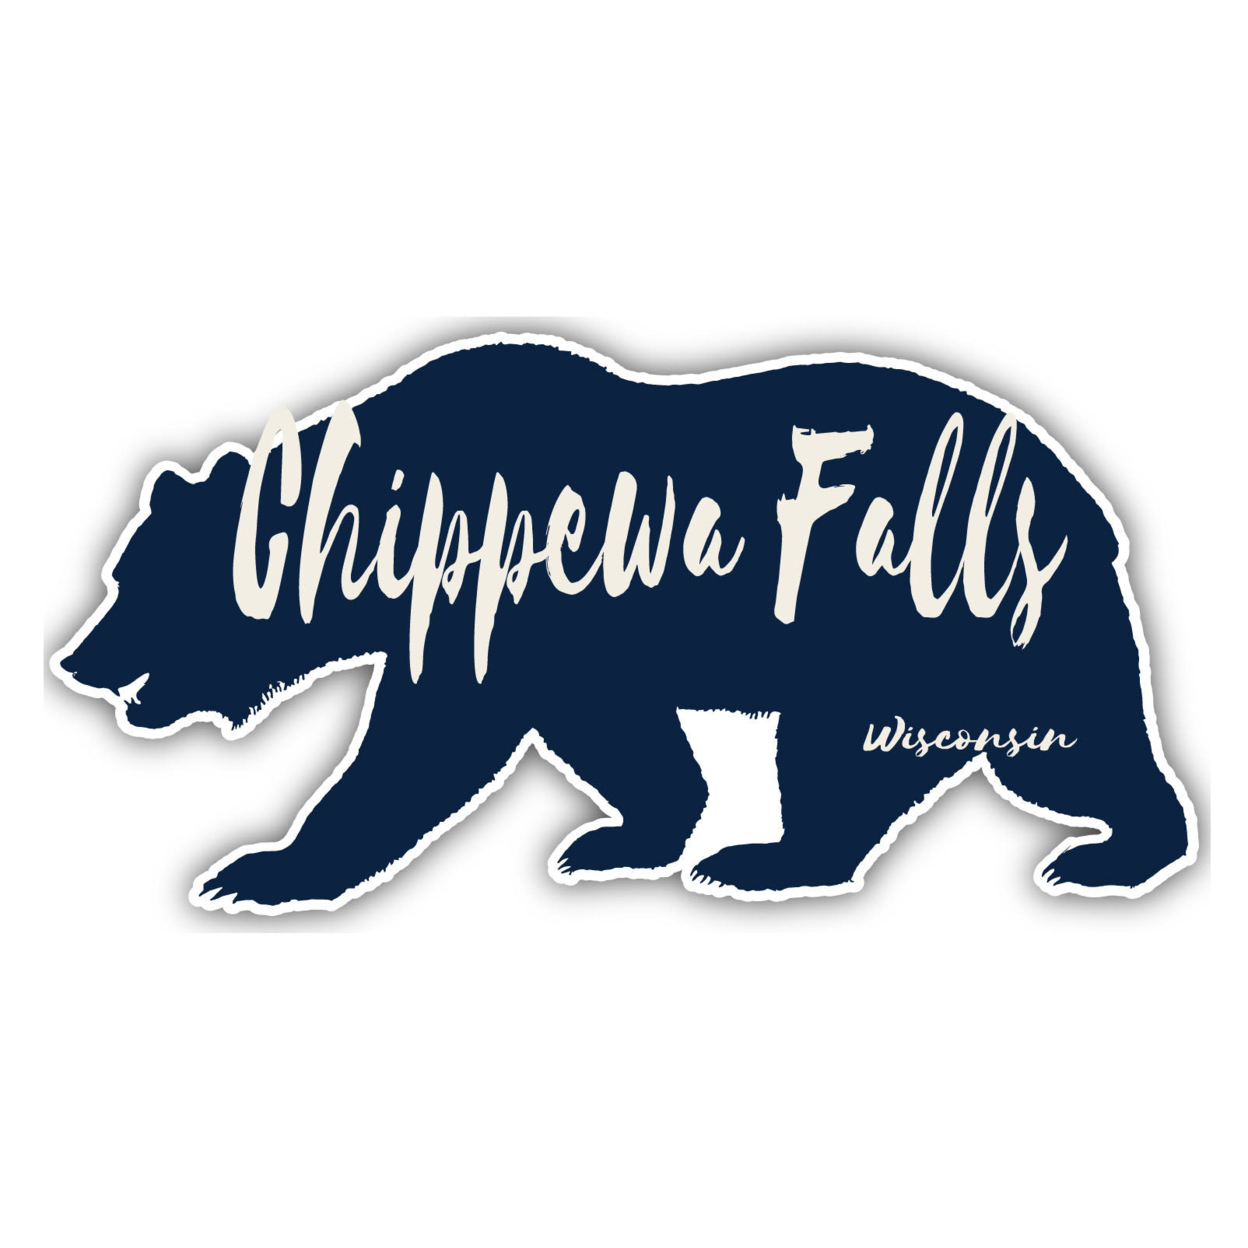 Chippewa Falls Wisconsin Souvenir Decorative Stickers (Choose Theme And Size) - 4-Pack, 2-Inch, Bear